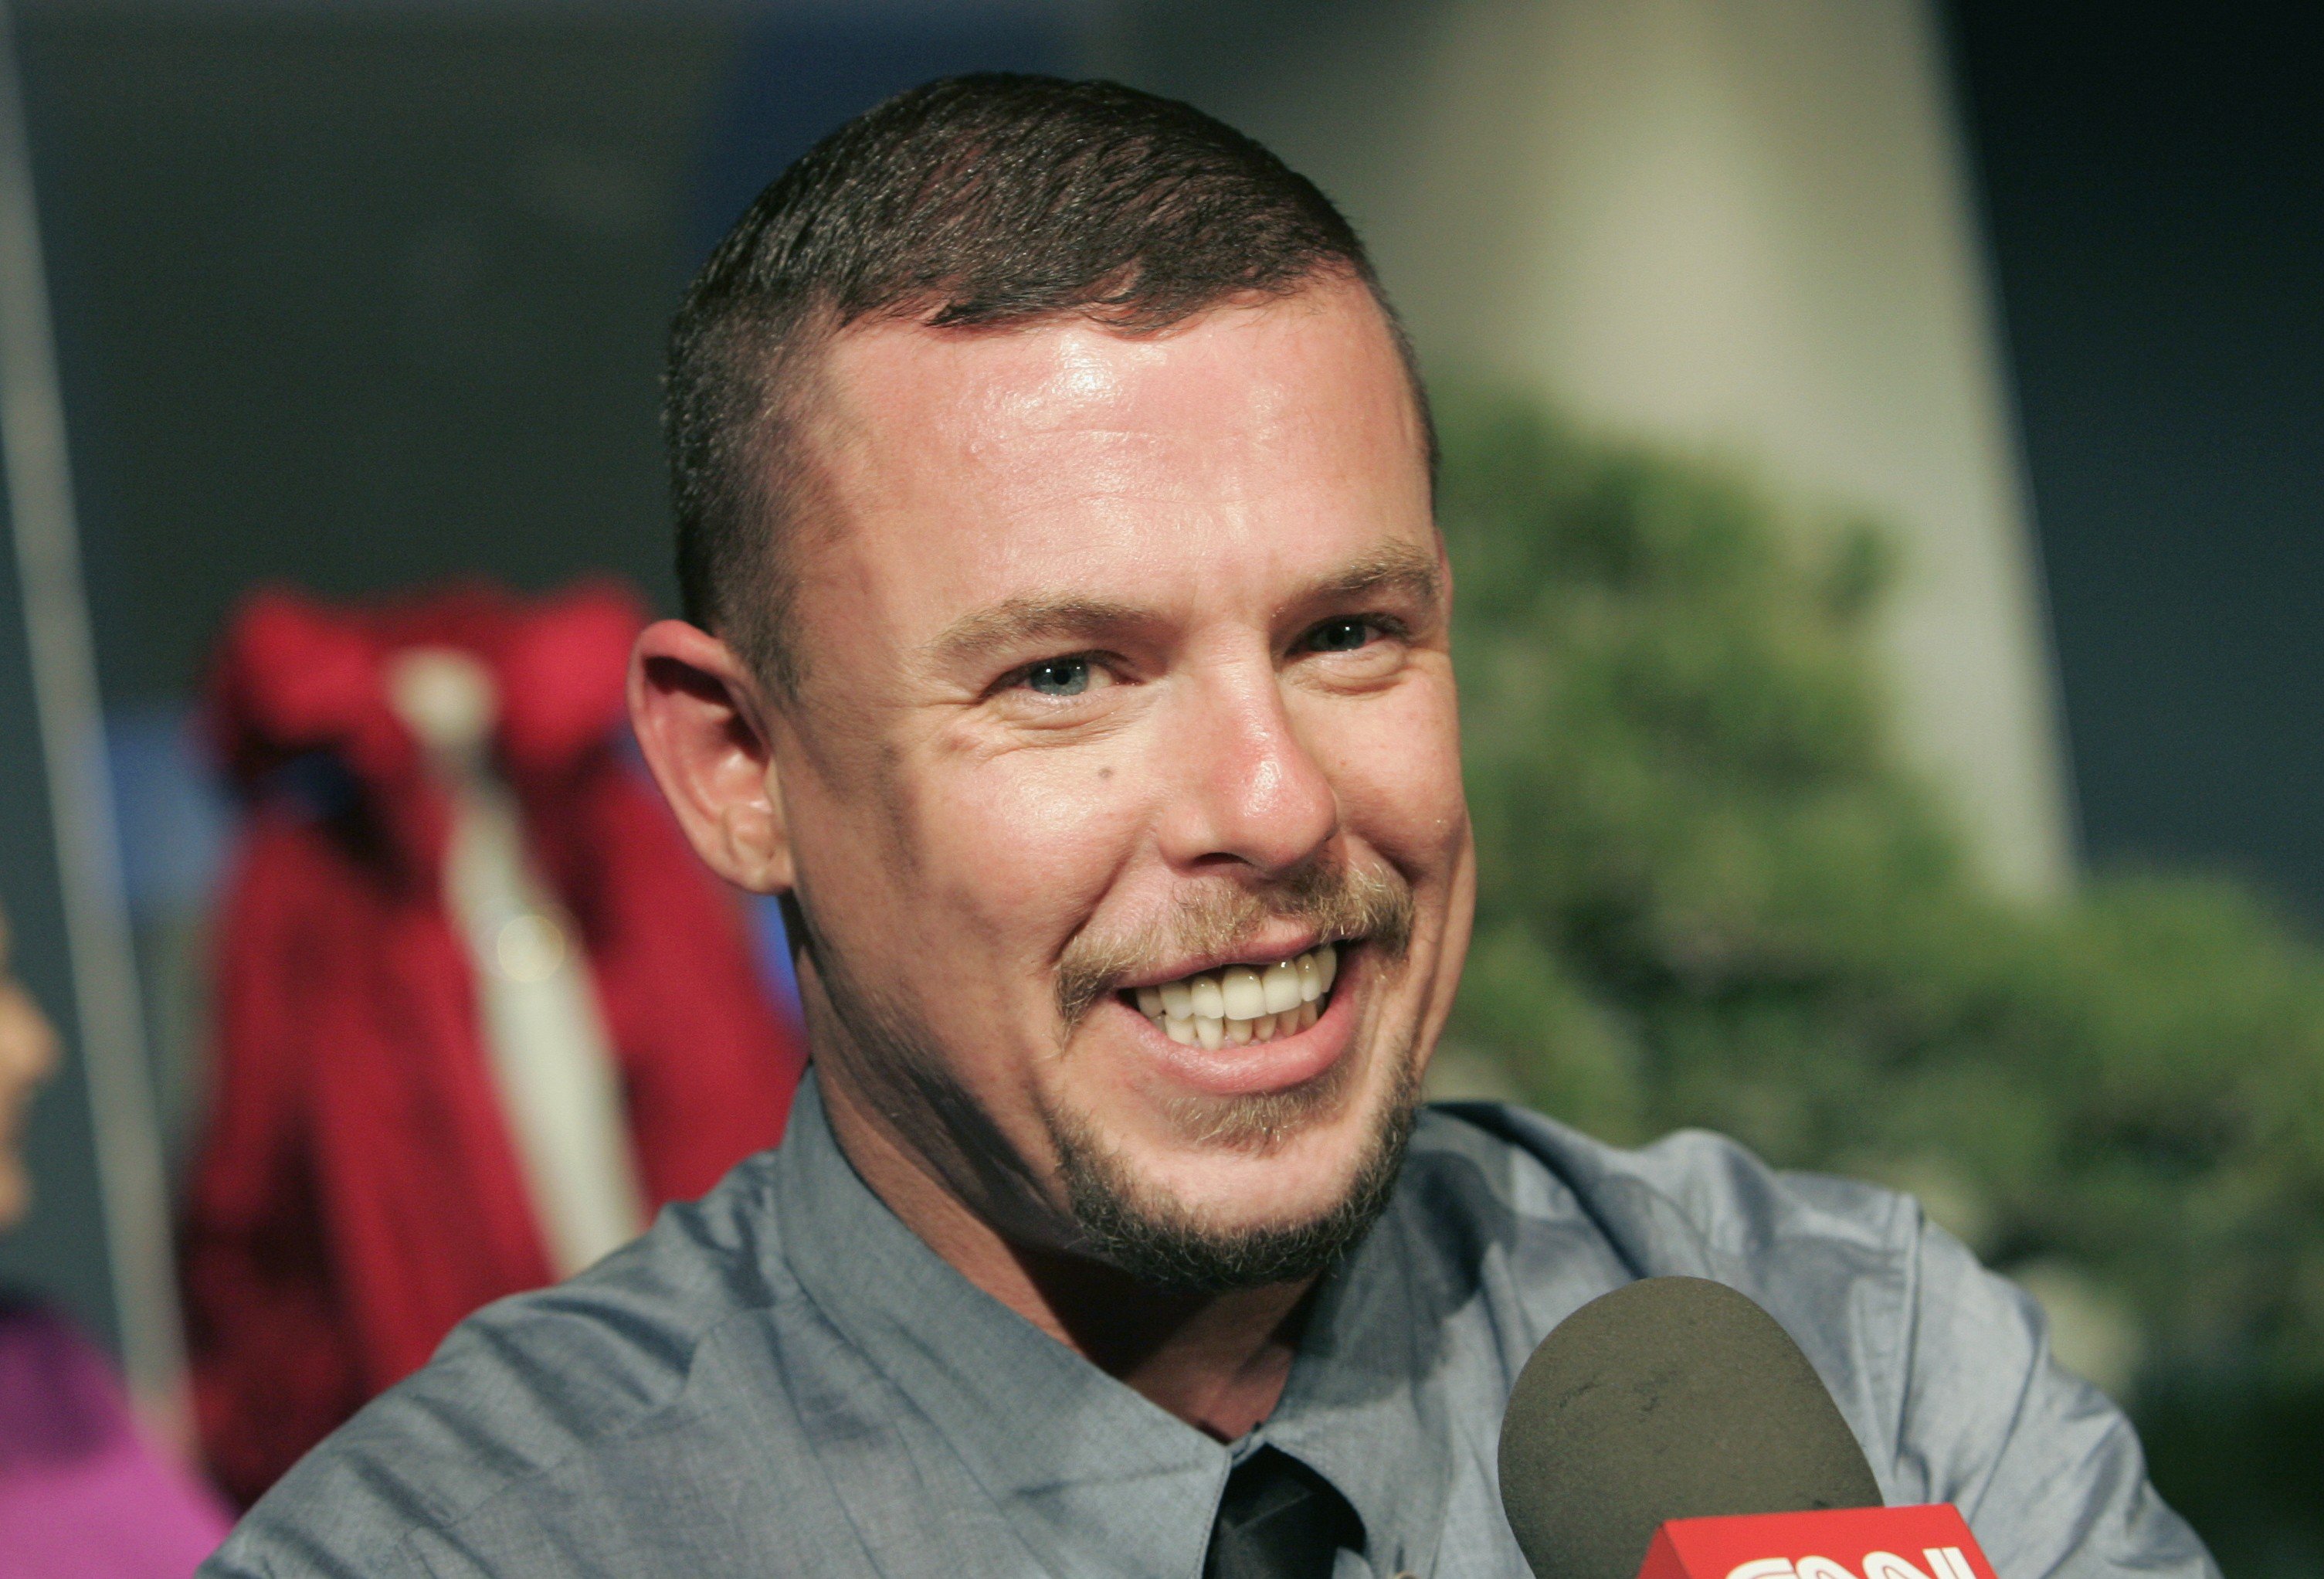 Who was Alexander McQueen, when was his death and which famous